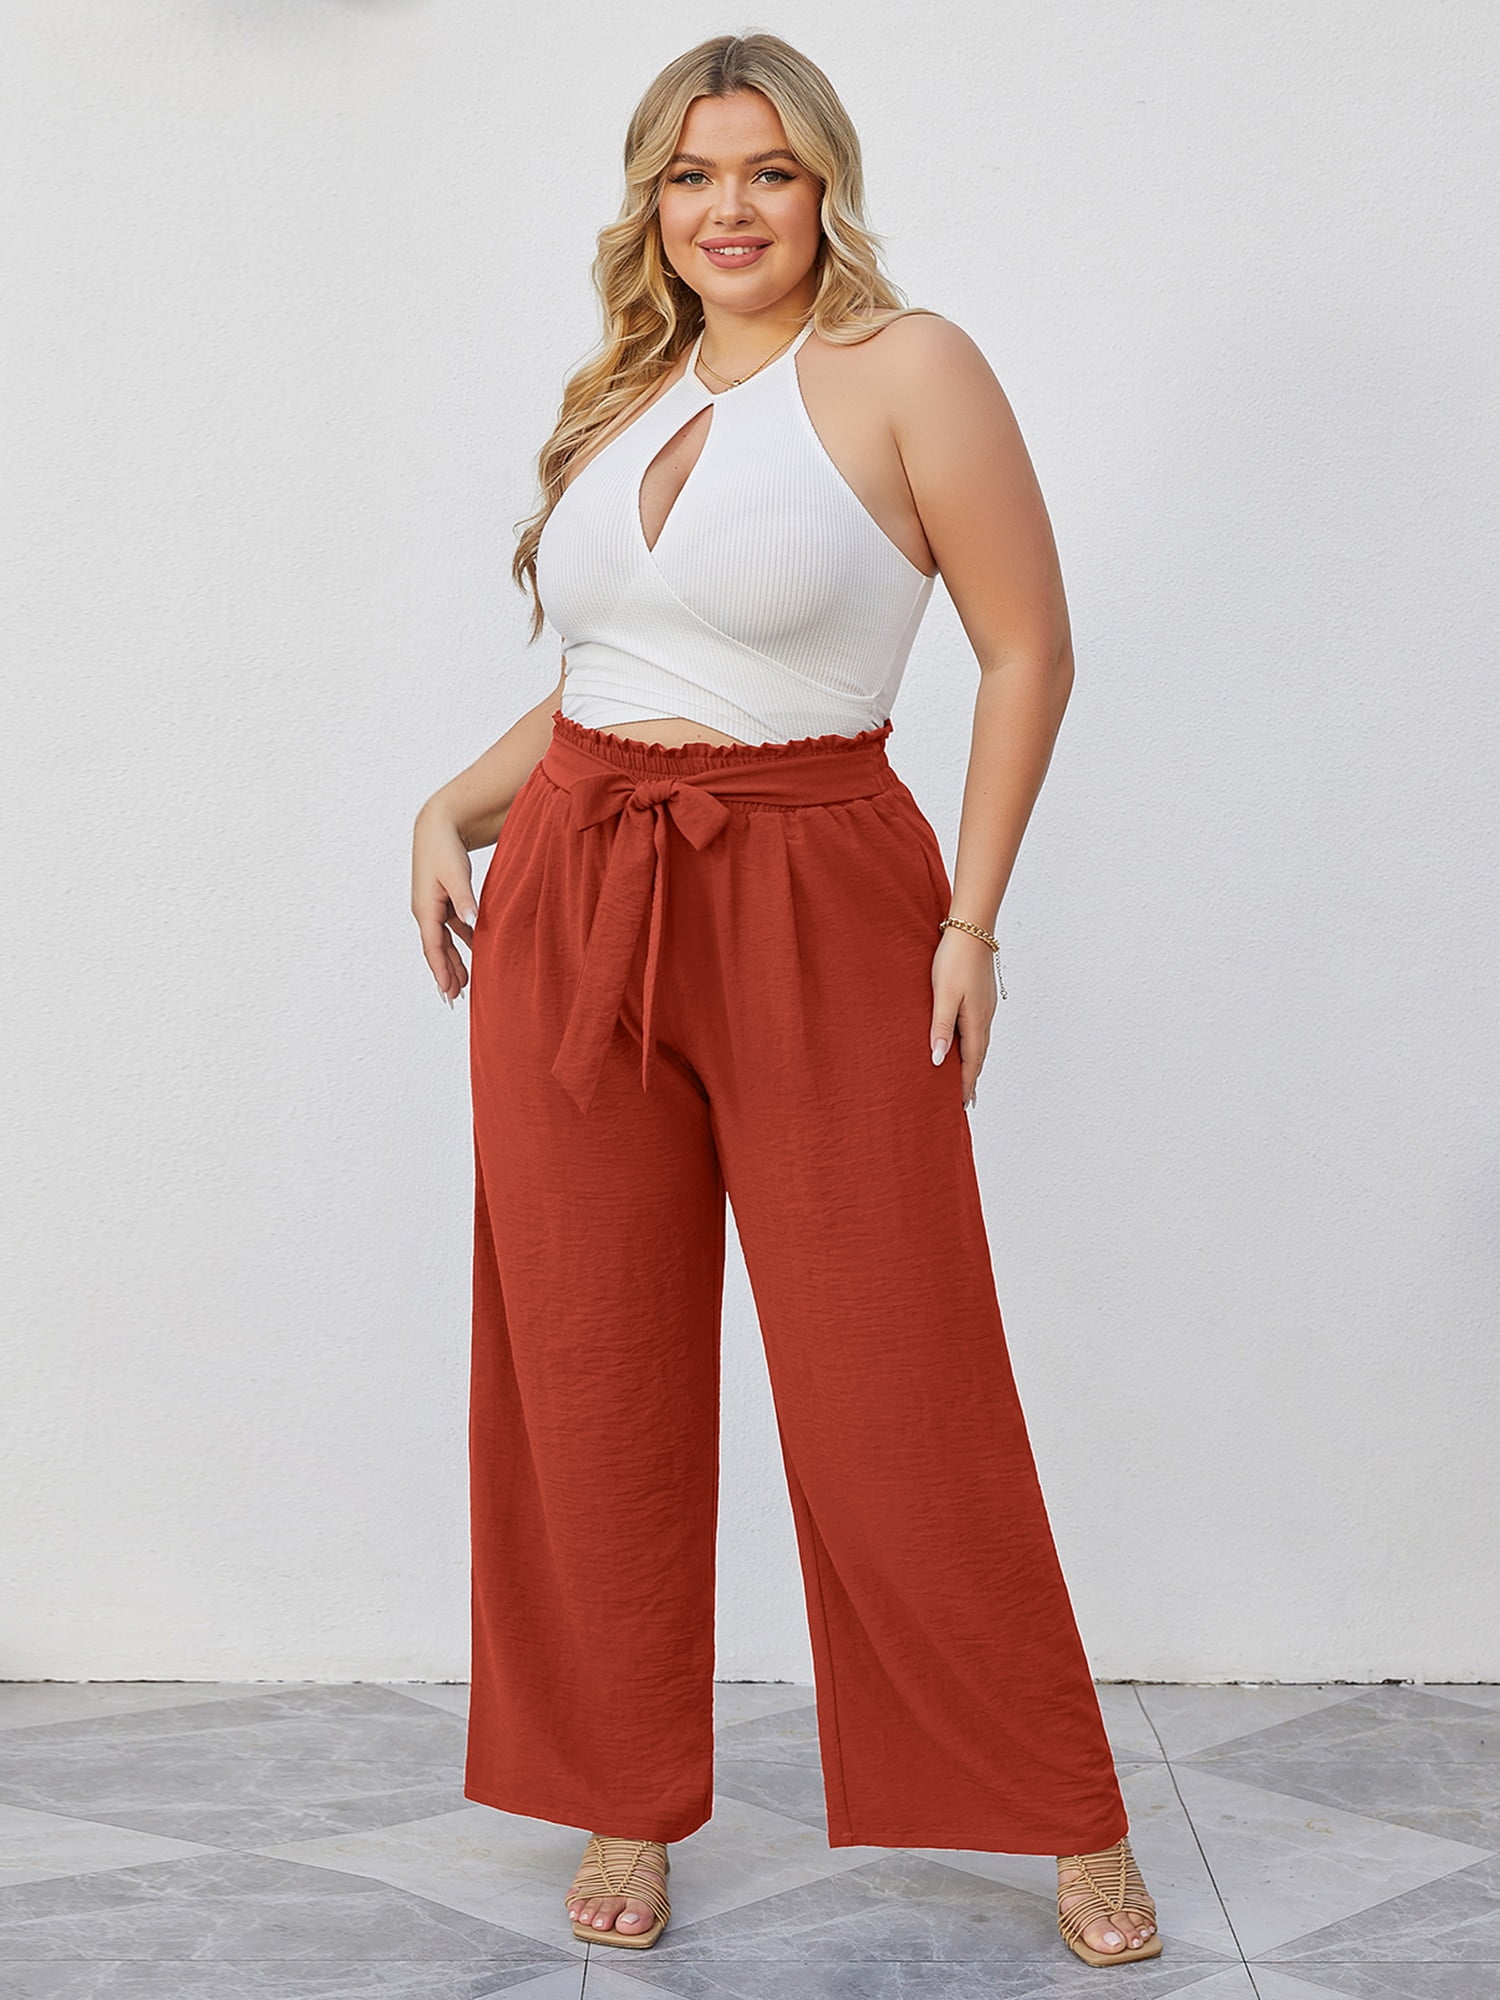 YOCUR Summer Beach Vacation Pants High Waisted Wide Leg Pants for Women  Printed Loose Flowy Palazzo Lounge Trousers Orange M - Yahoo Shopping